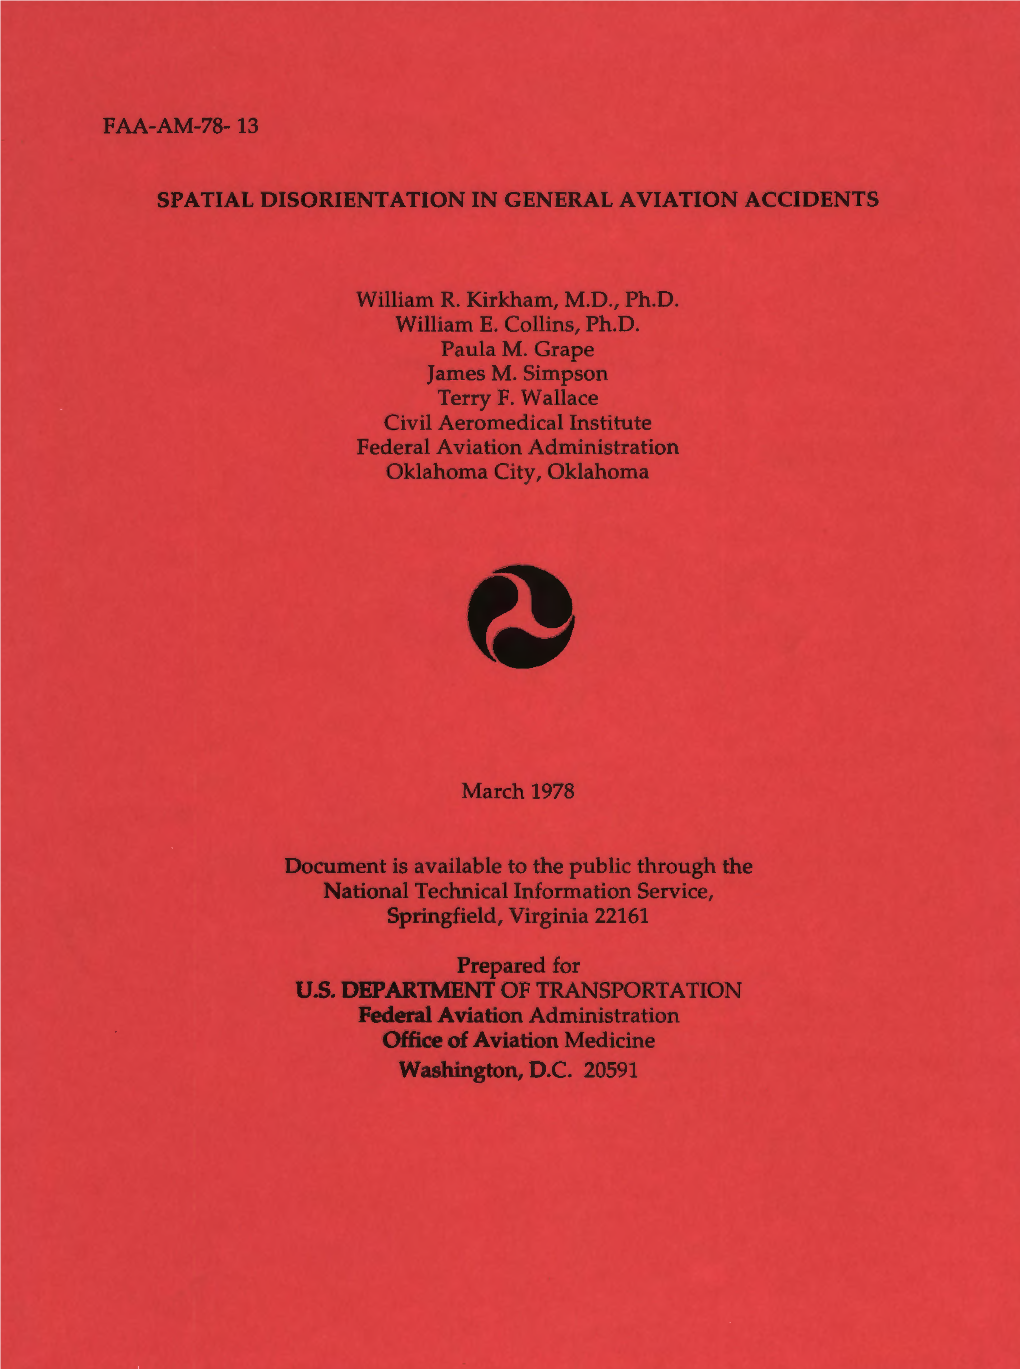 Spatial Disorientation in General Aviation Accidents